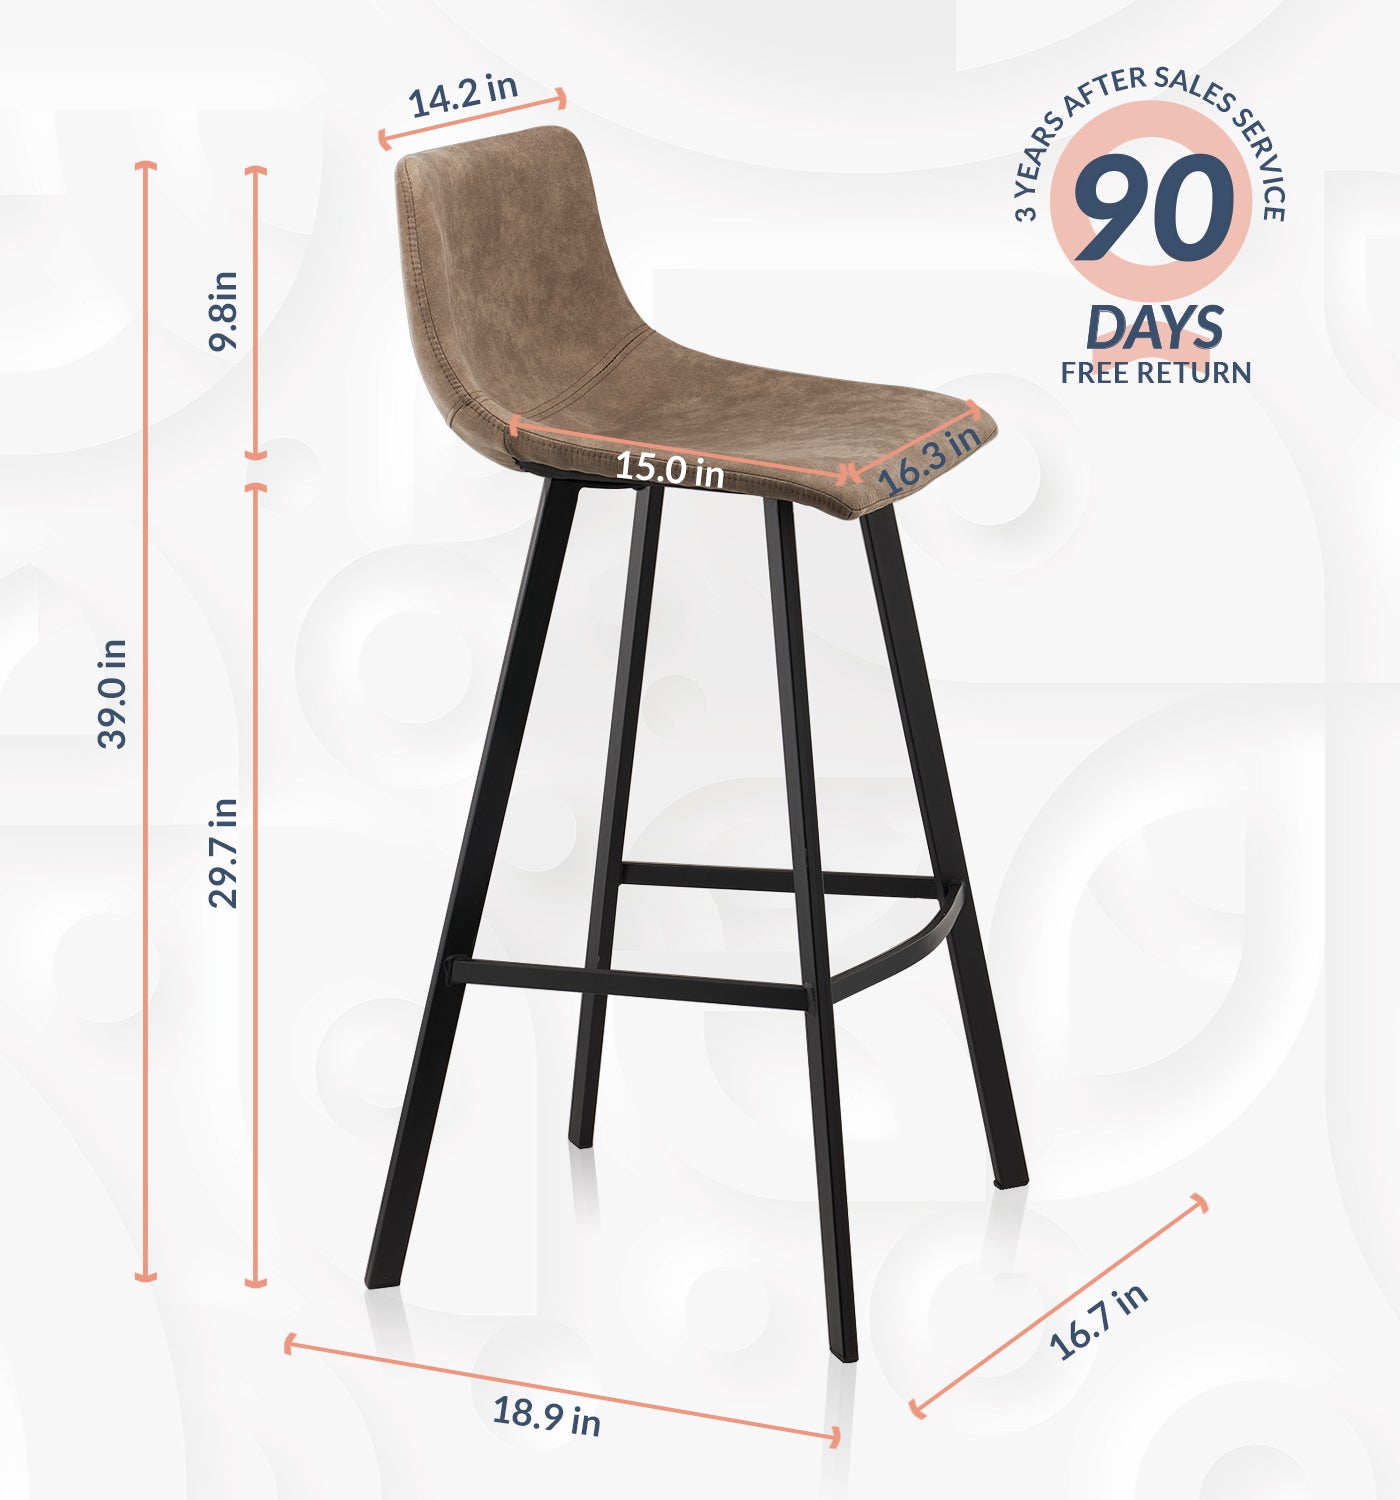 NOVIGO Urban Industrial Bar Stool 38 Inches with Backrest and Footrest for Cafes Height Stools, Vintage Pub Bars,Living Room,Kitchen,Set of 2,Geometric Design Bottom Support